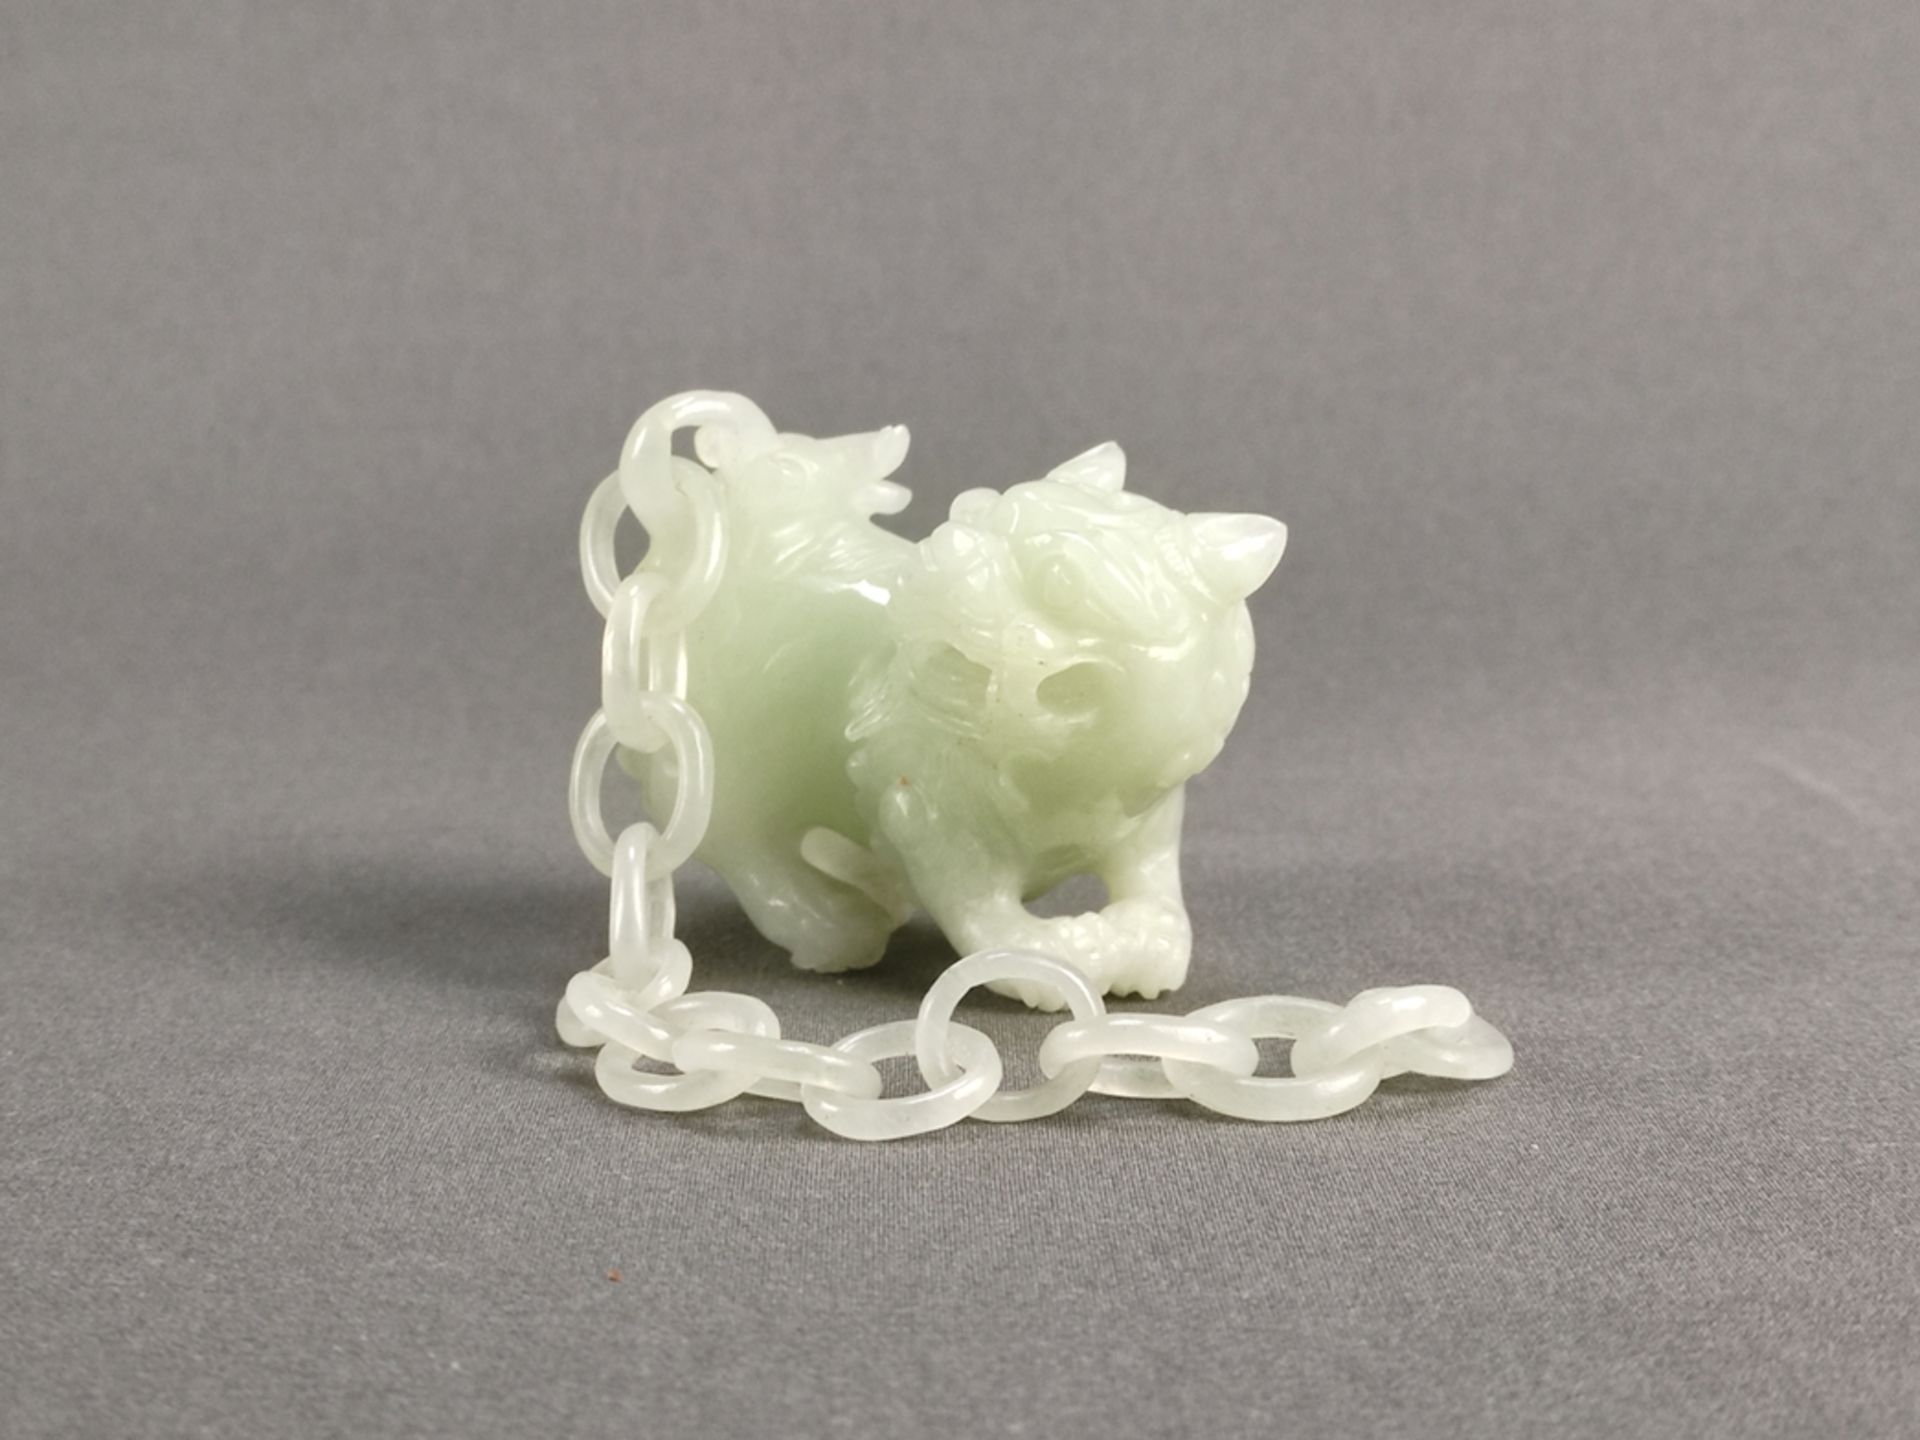 Convolute of jade carvings, Asian, 4 pieces, consisting of: lidded vessel with 3 lion feet, on a wo - Image 3 of 4